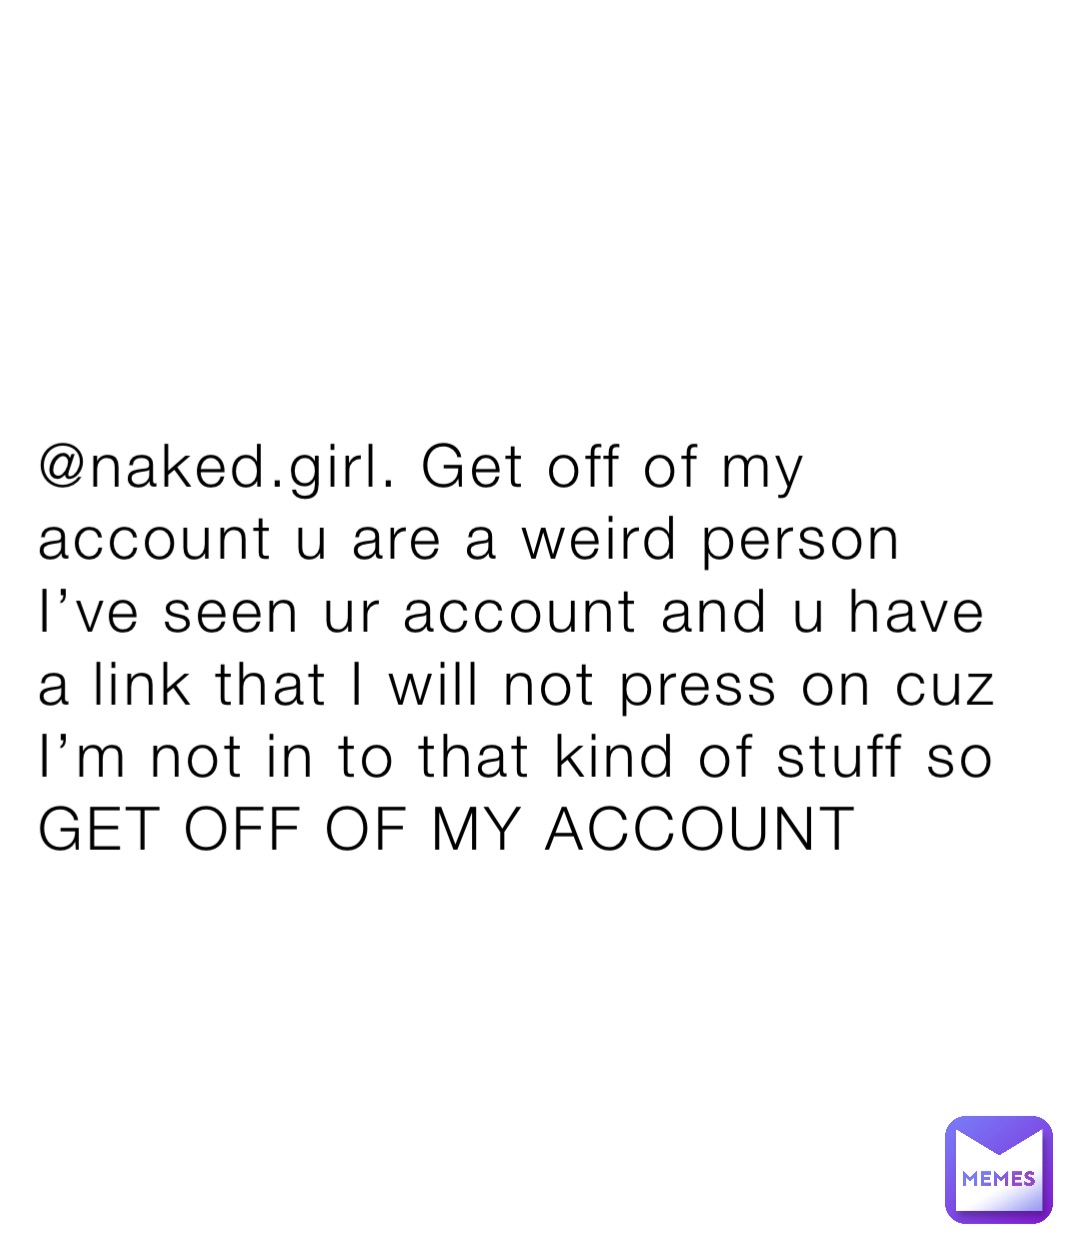 @naked.girl. Get off of my account u are a weird person I’ve seen ur account and u have a link that I will not press on cuz I’m not in to that kind of stuff so GET OFF OF MY ACCOUNT